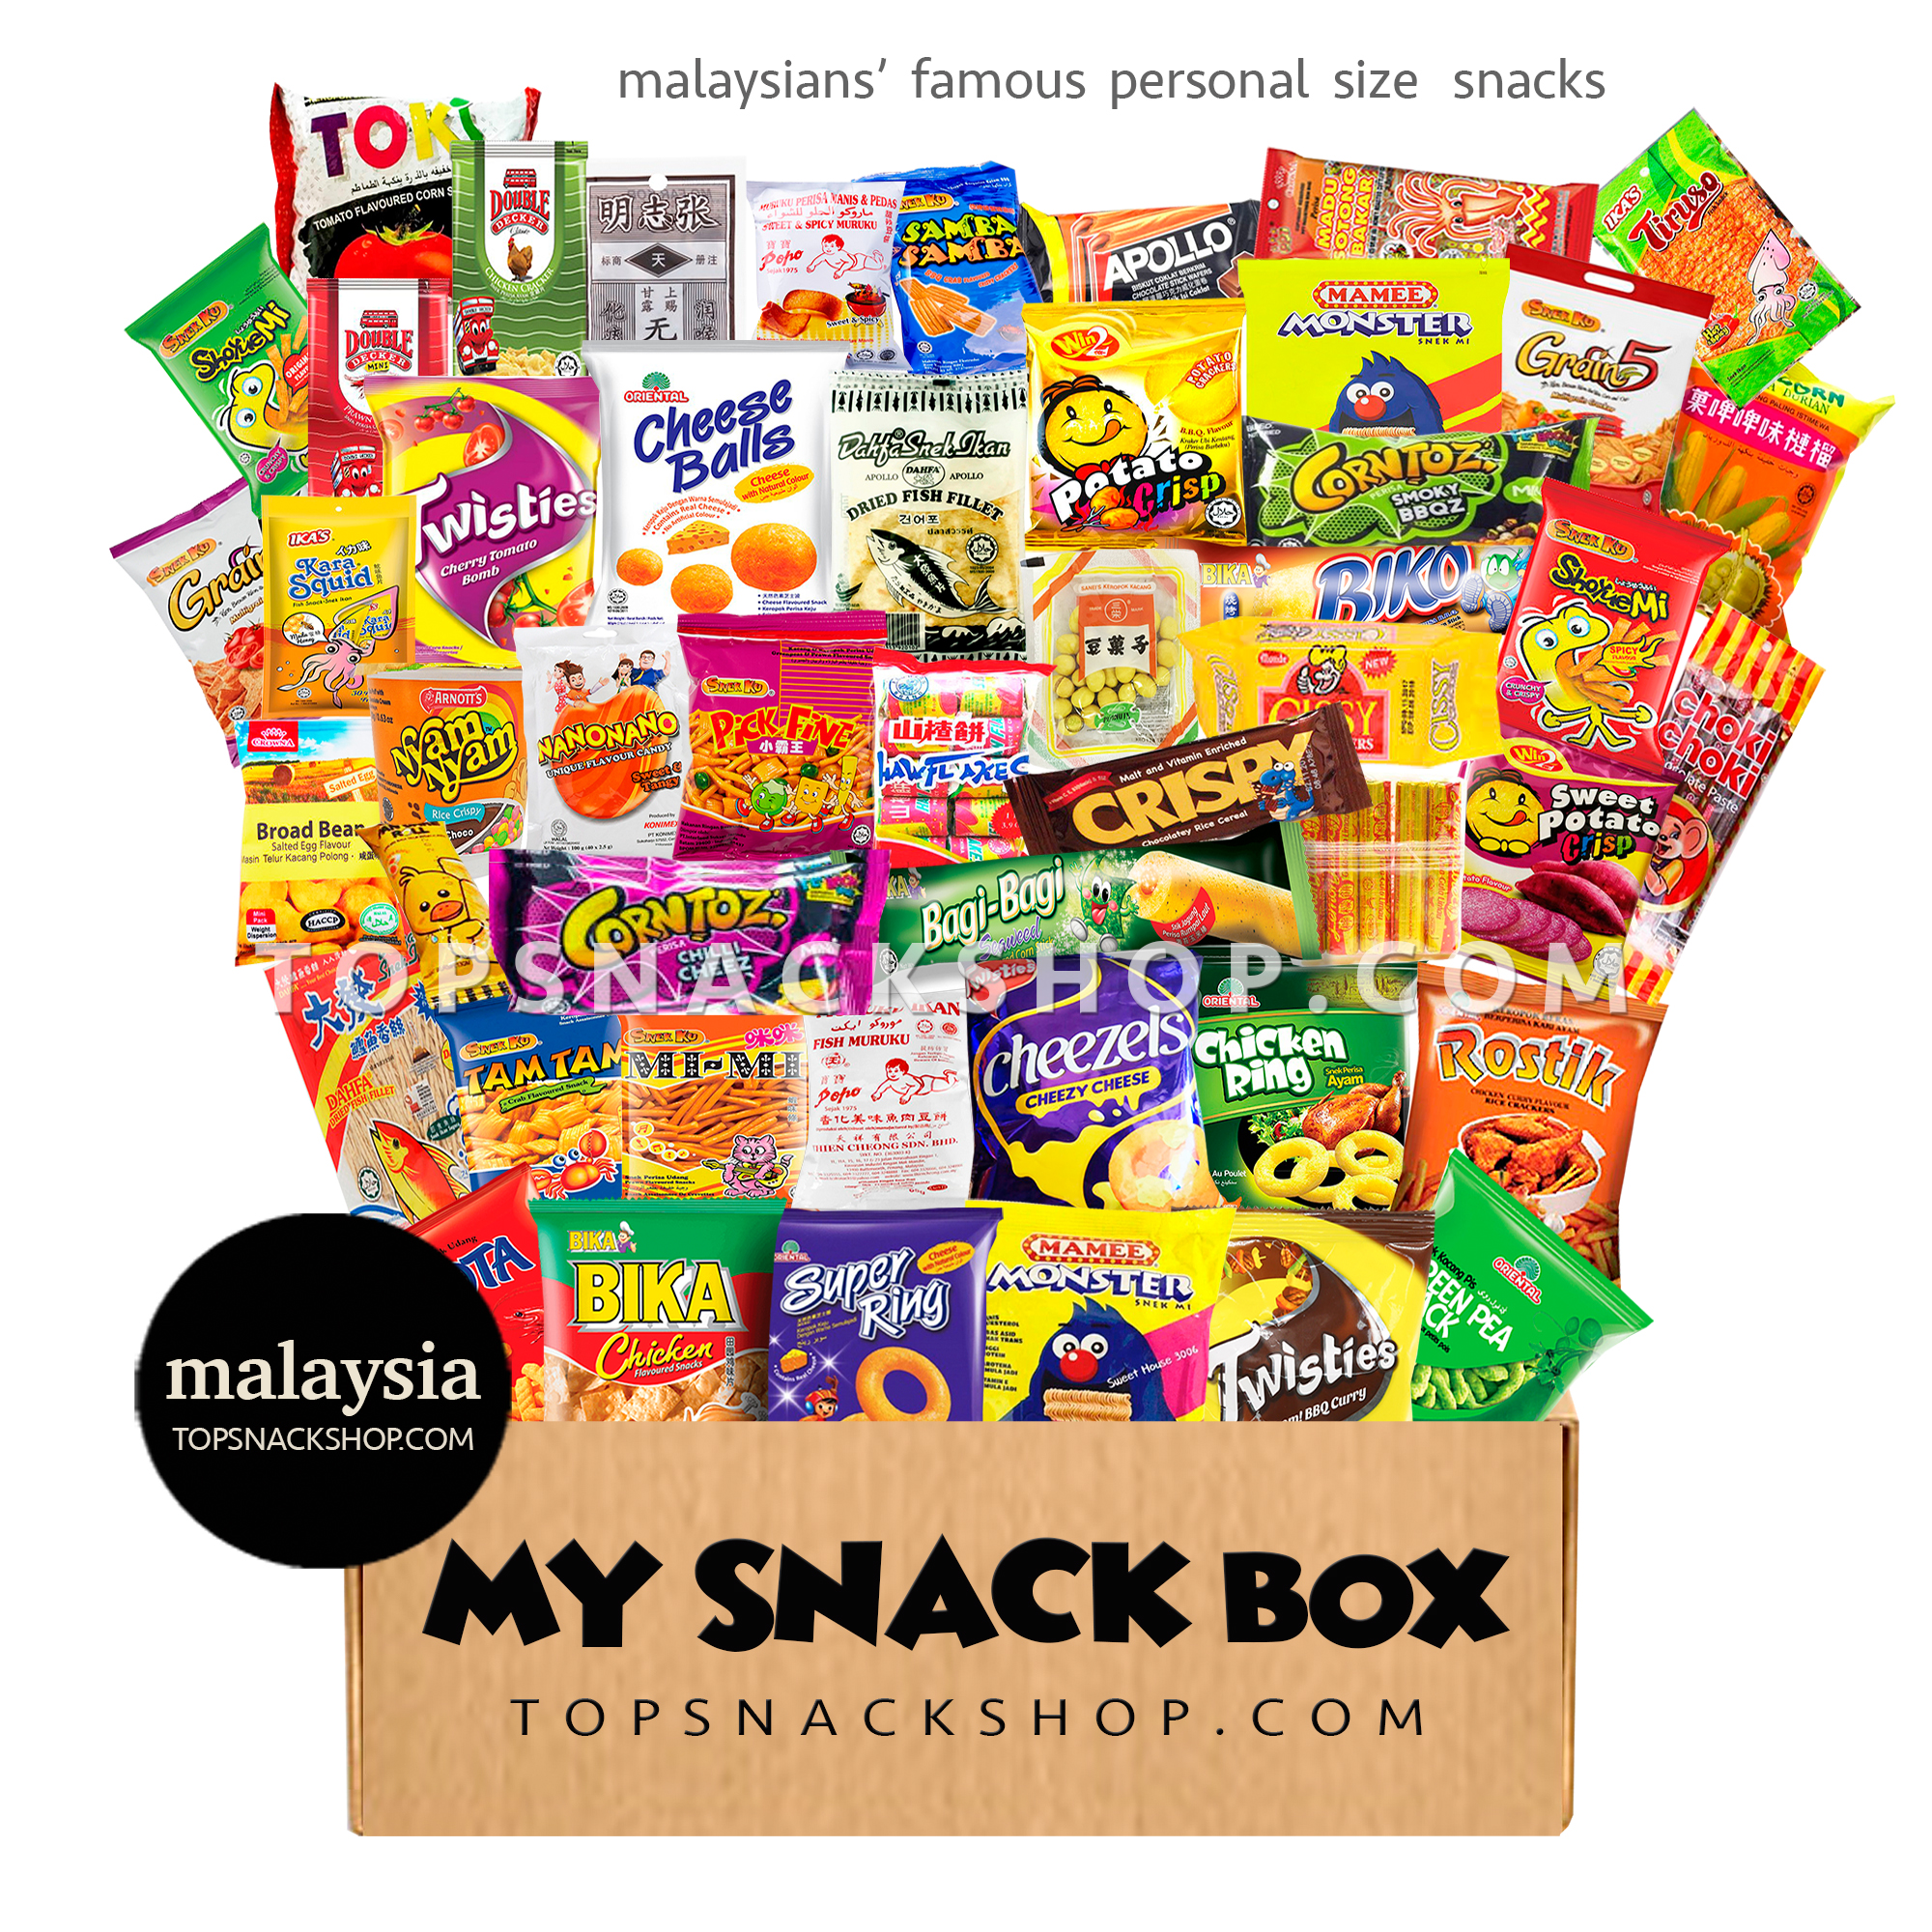 NEW TSS personal size snack box